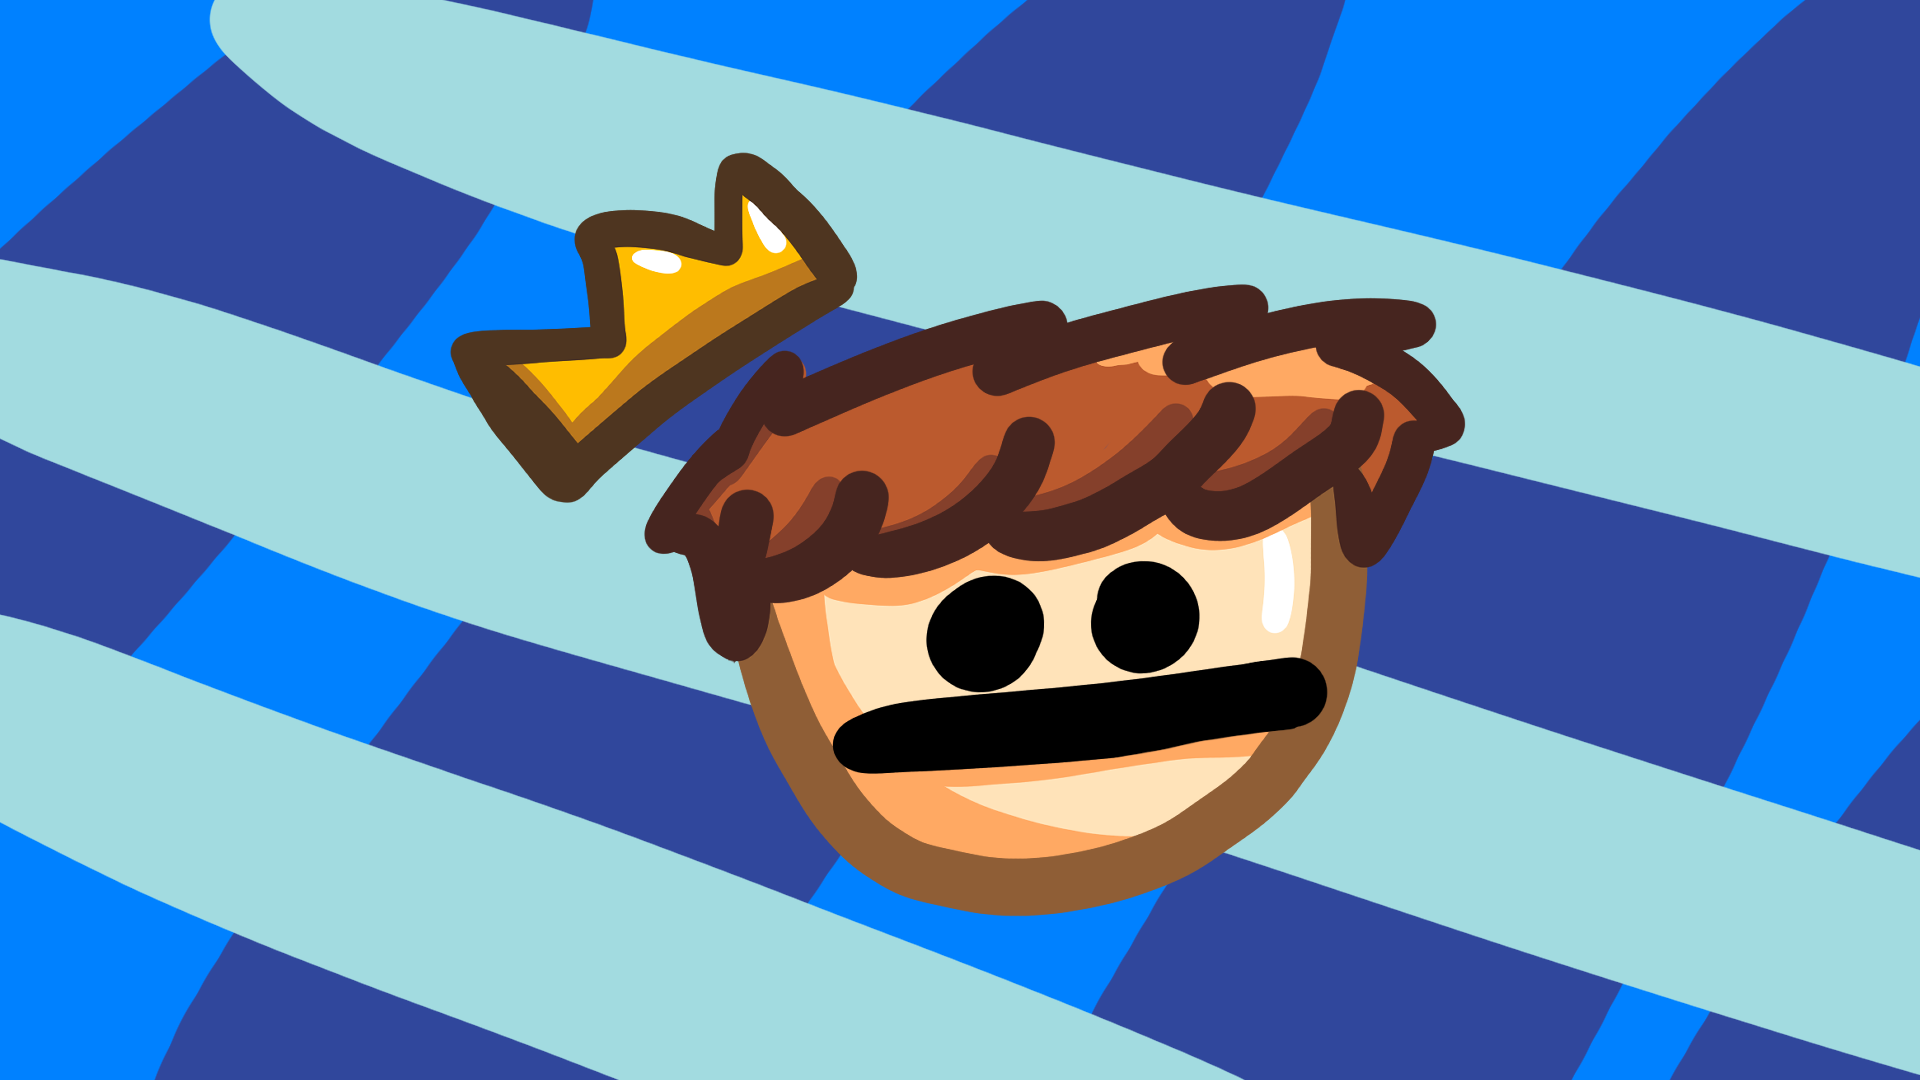 Shrupp's Profile Picture on PvPRP